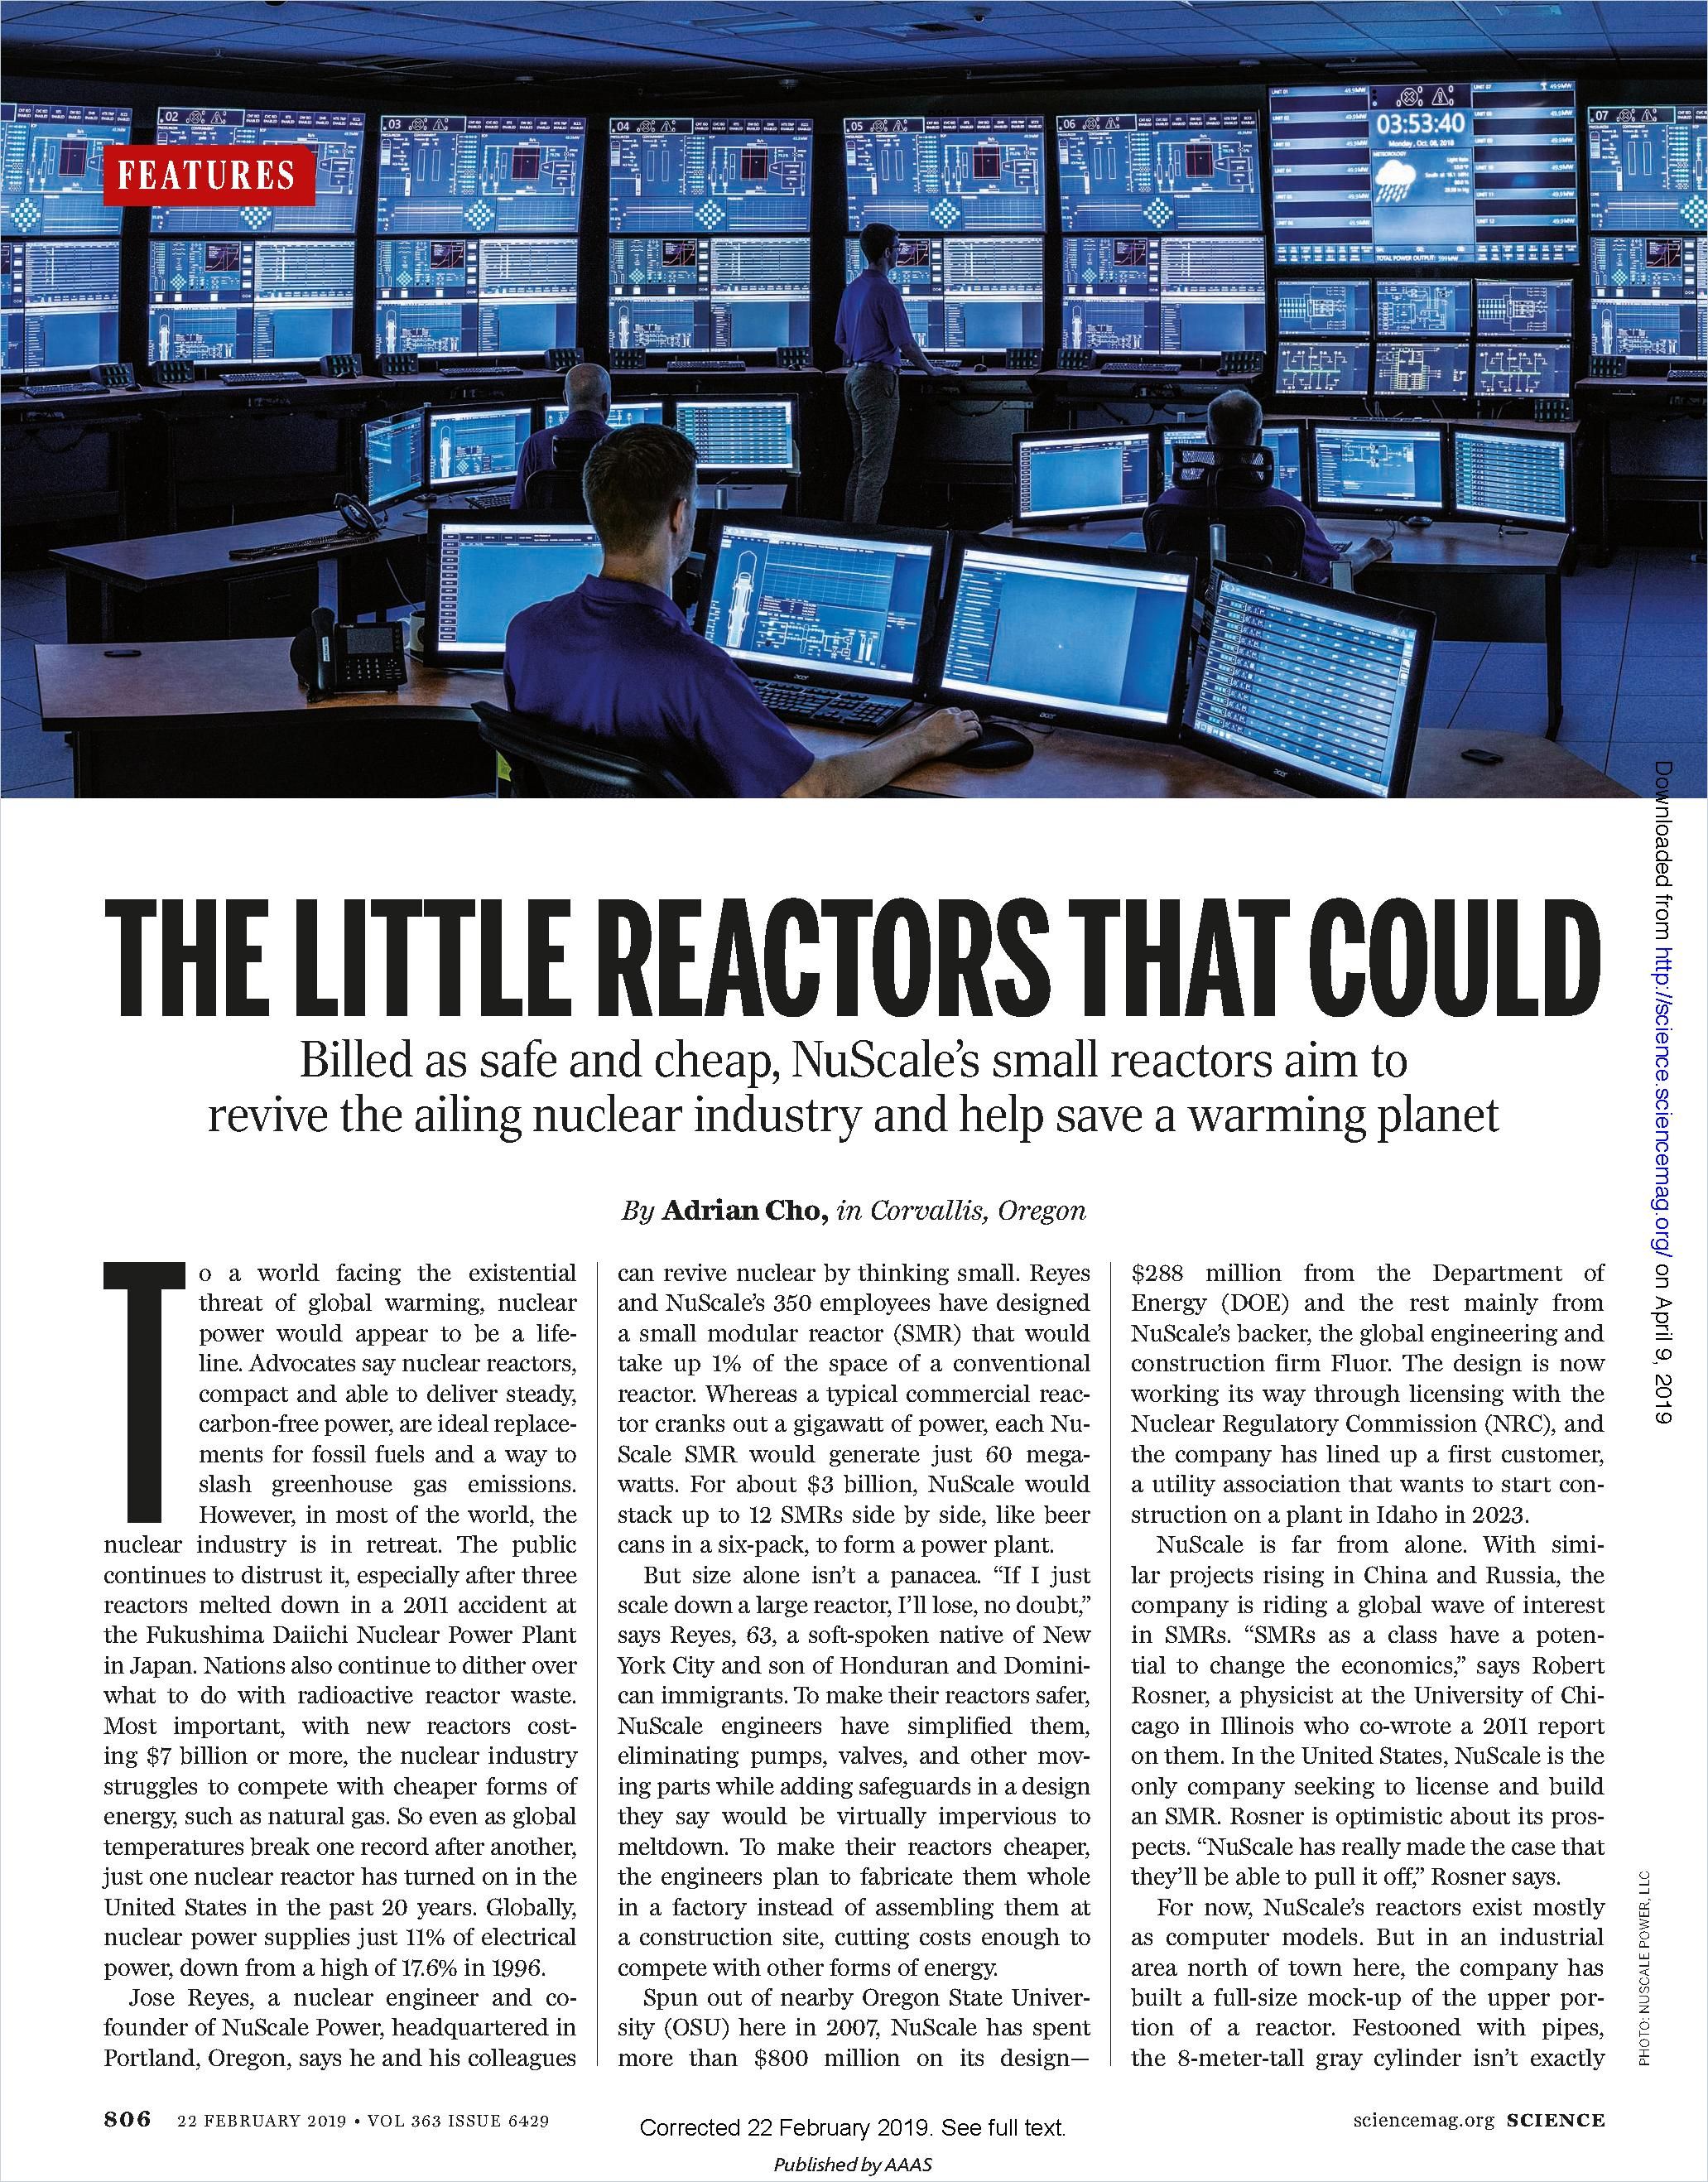 Image of: The Little Reactors that Could